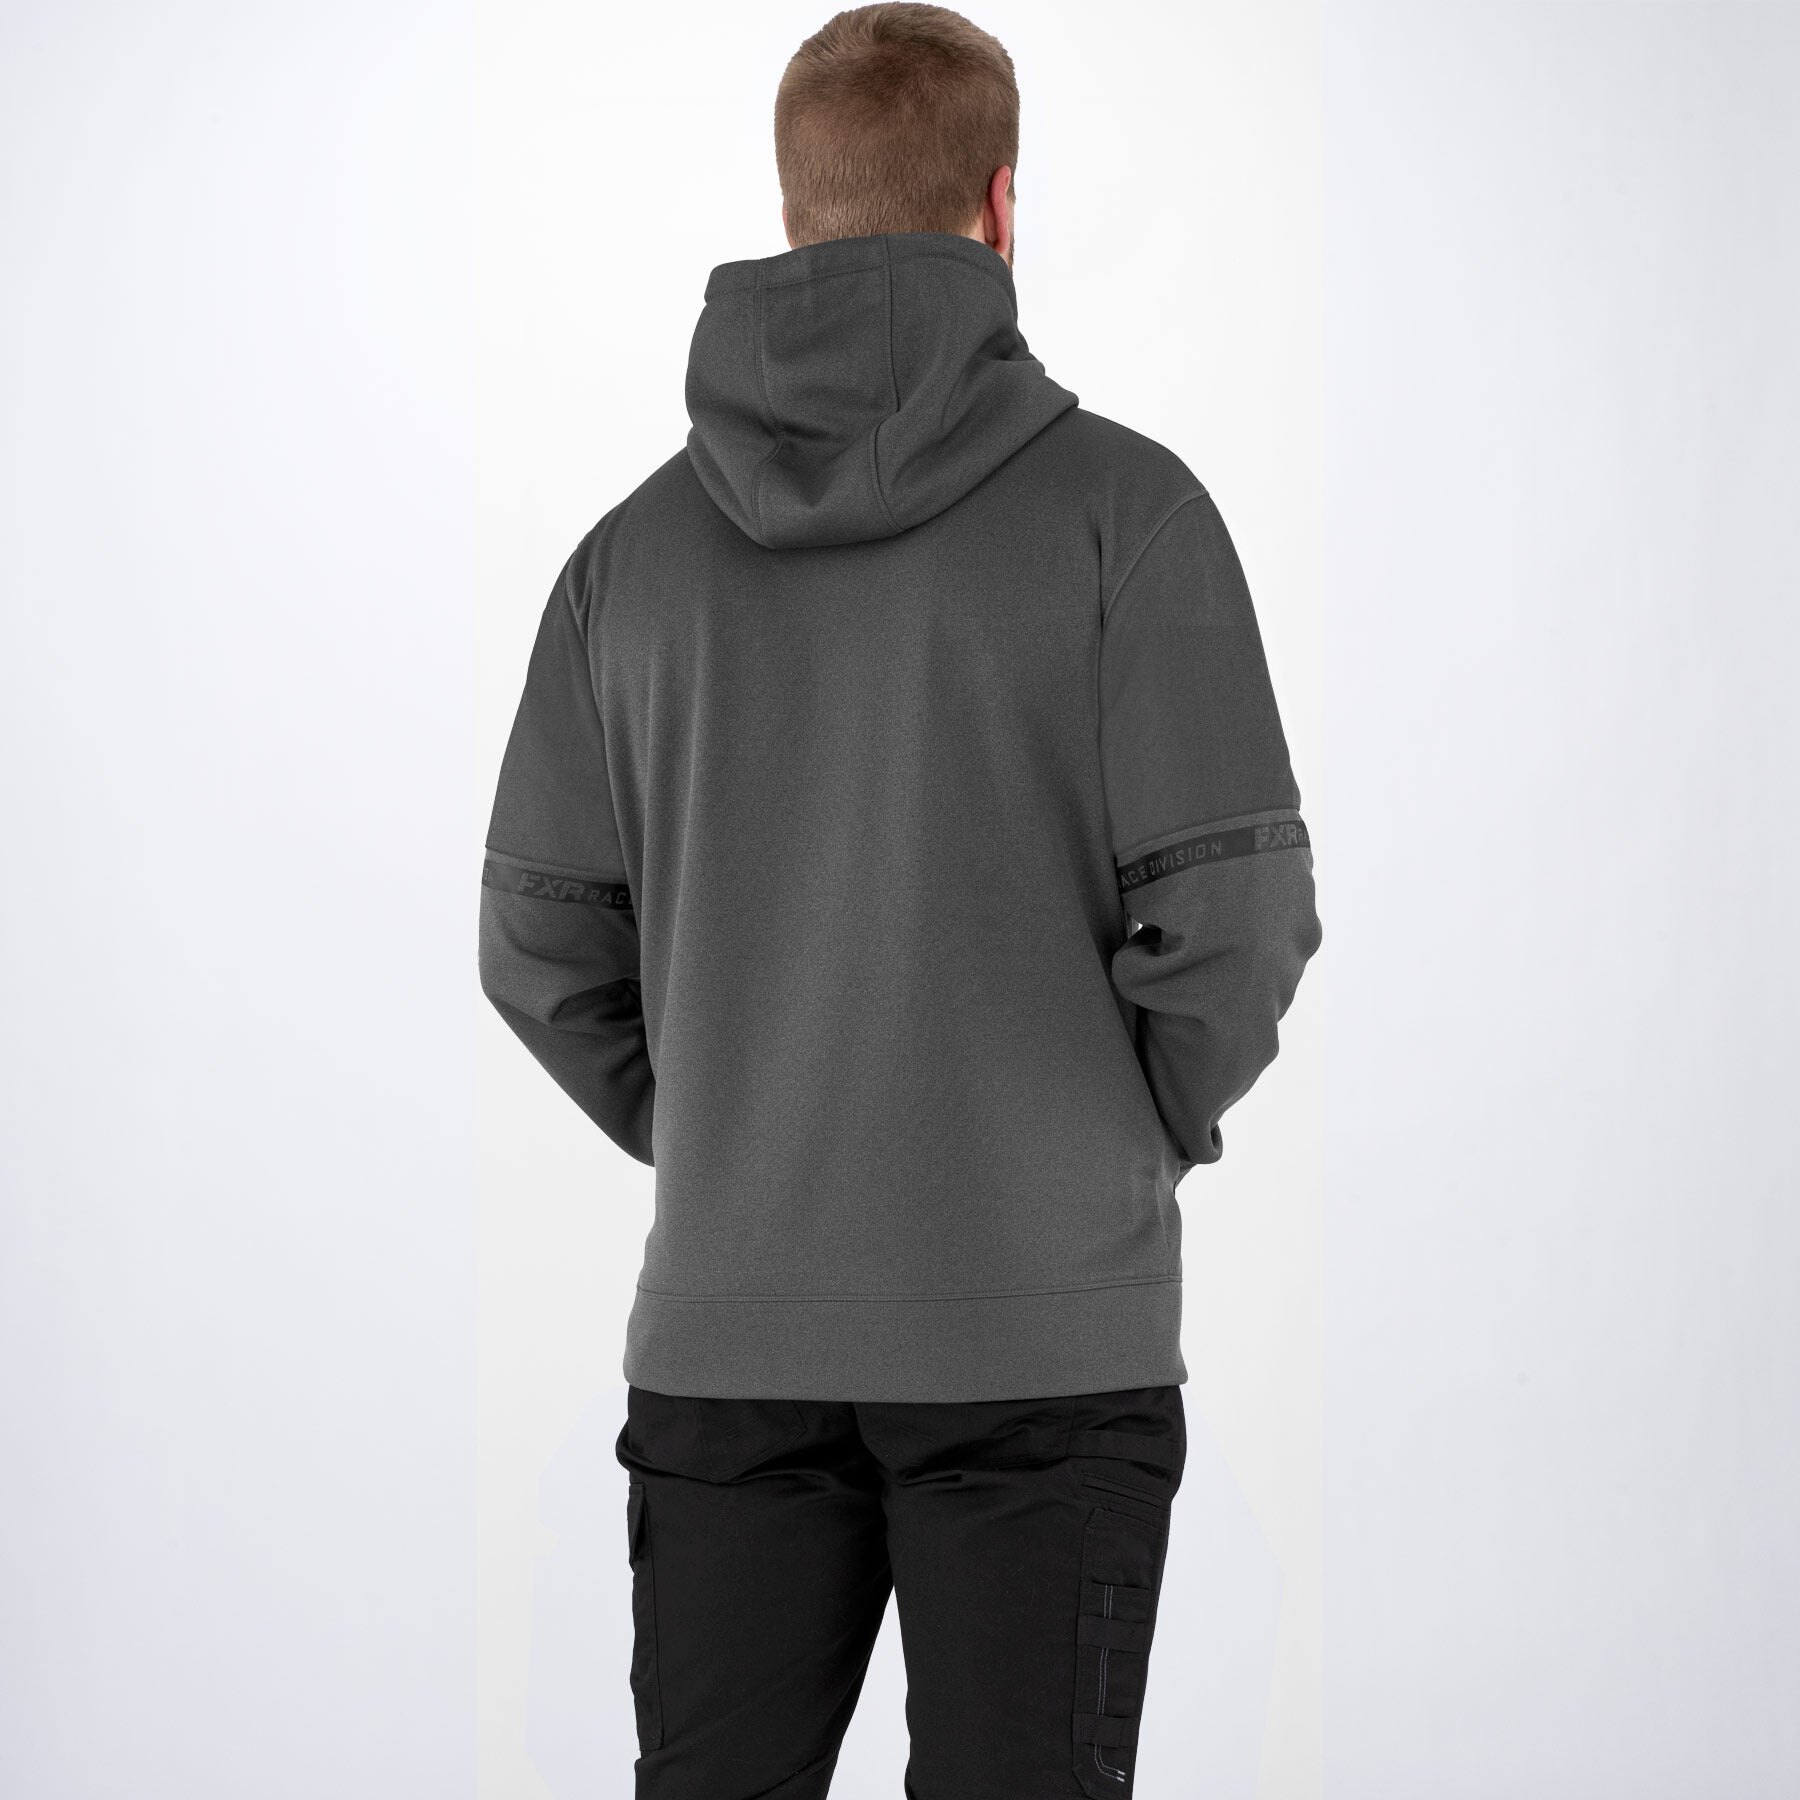 Men's Race Division Tech Pullover Hoodie